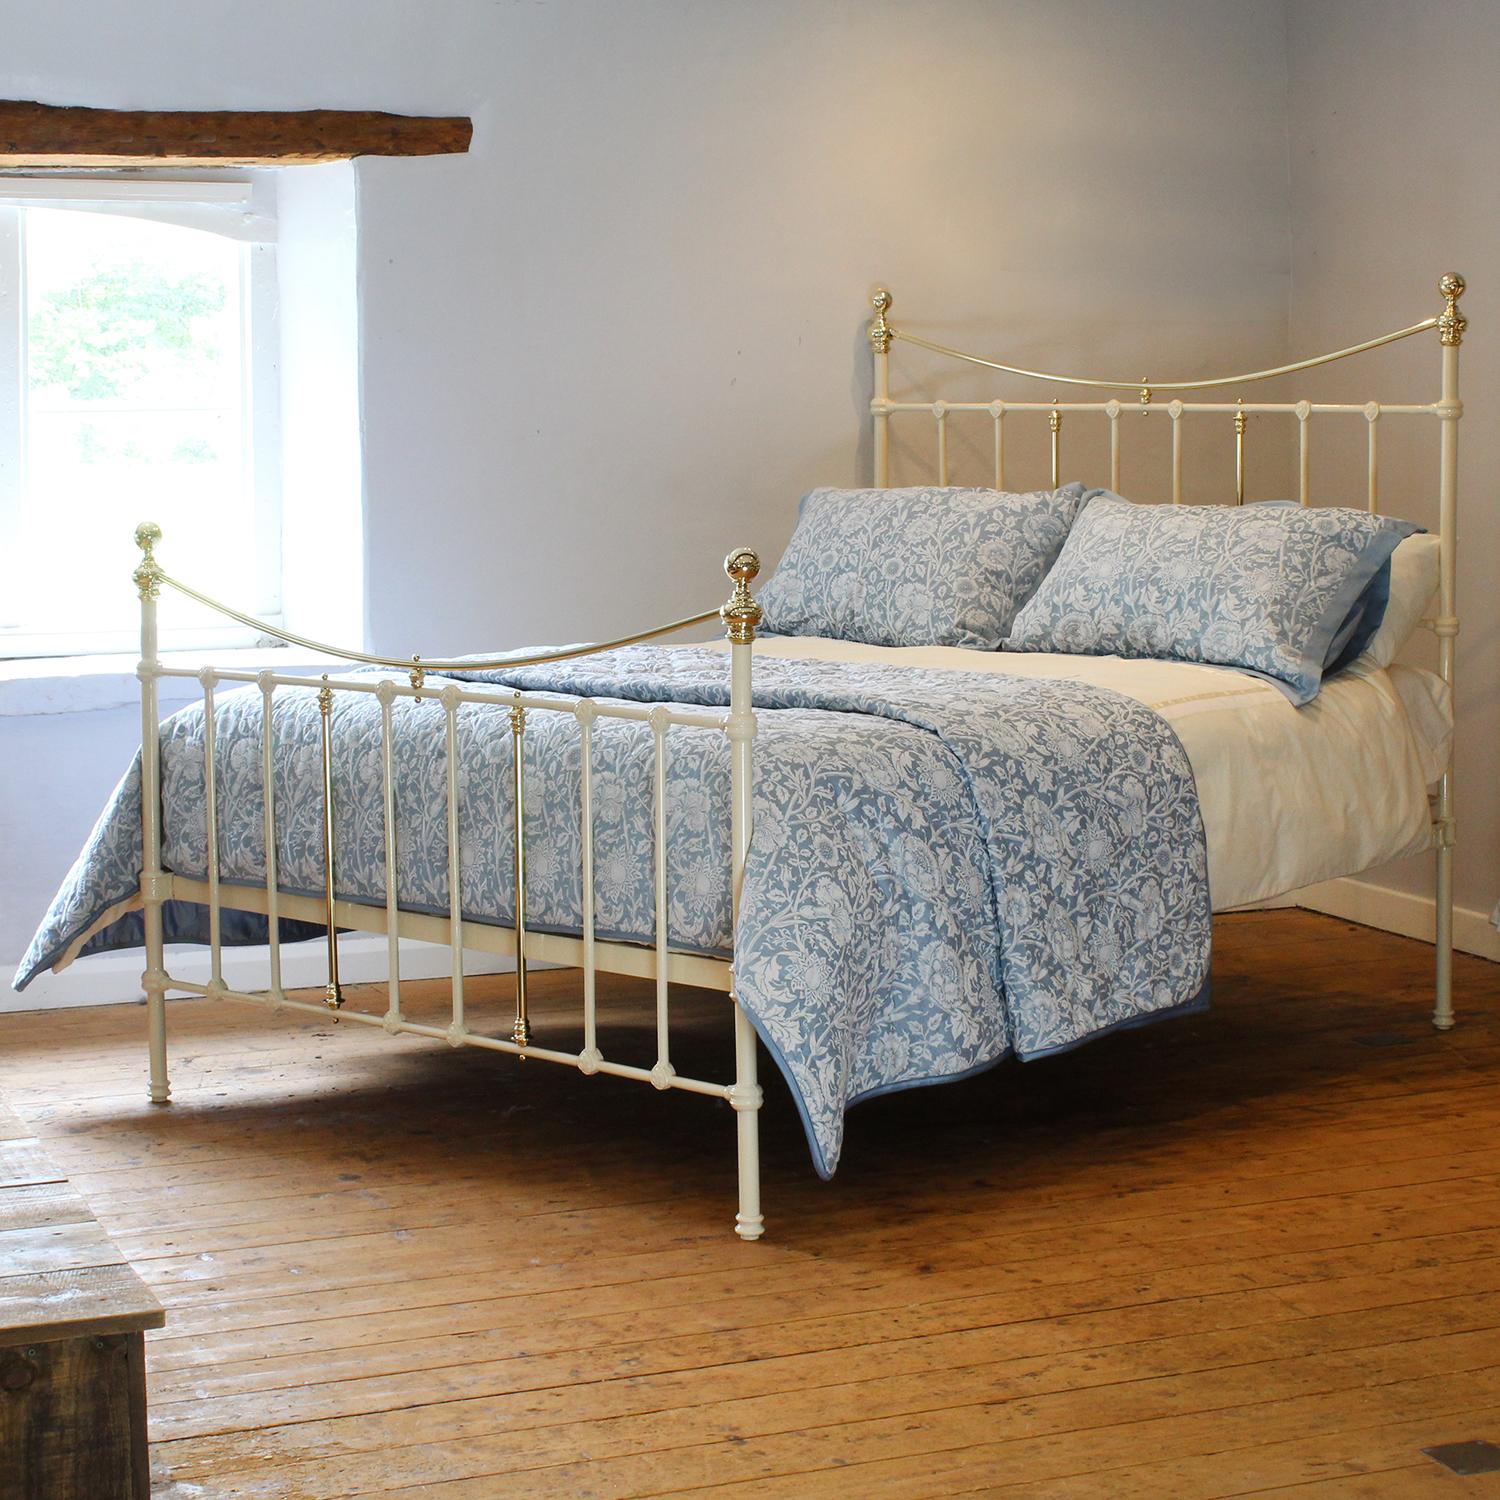 A lovely brass and iron antique bed with pretty mouldings and curved brass top rails.

This bed accepts a UK King or US Queen, 60 inch or 5ft wide, mattress and base.

The price also includes a firm bed base to support the mattress.

The